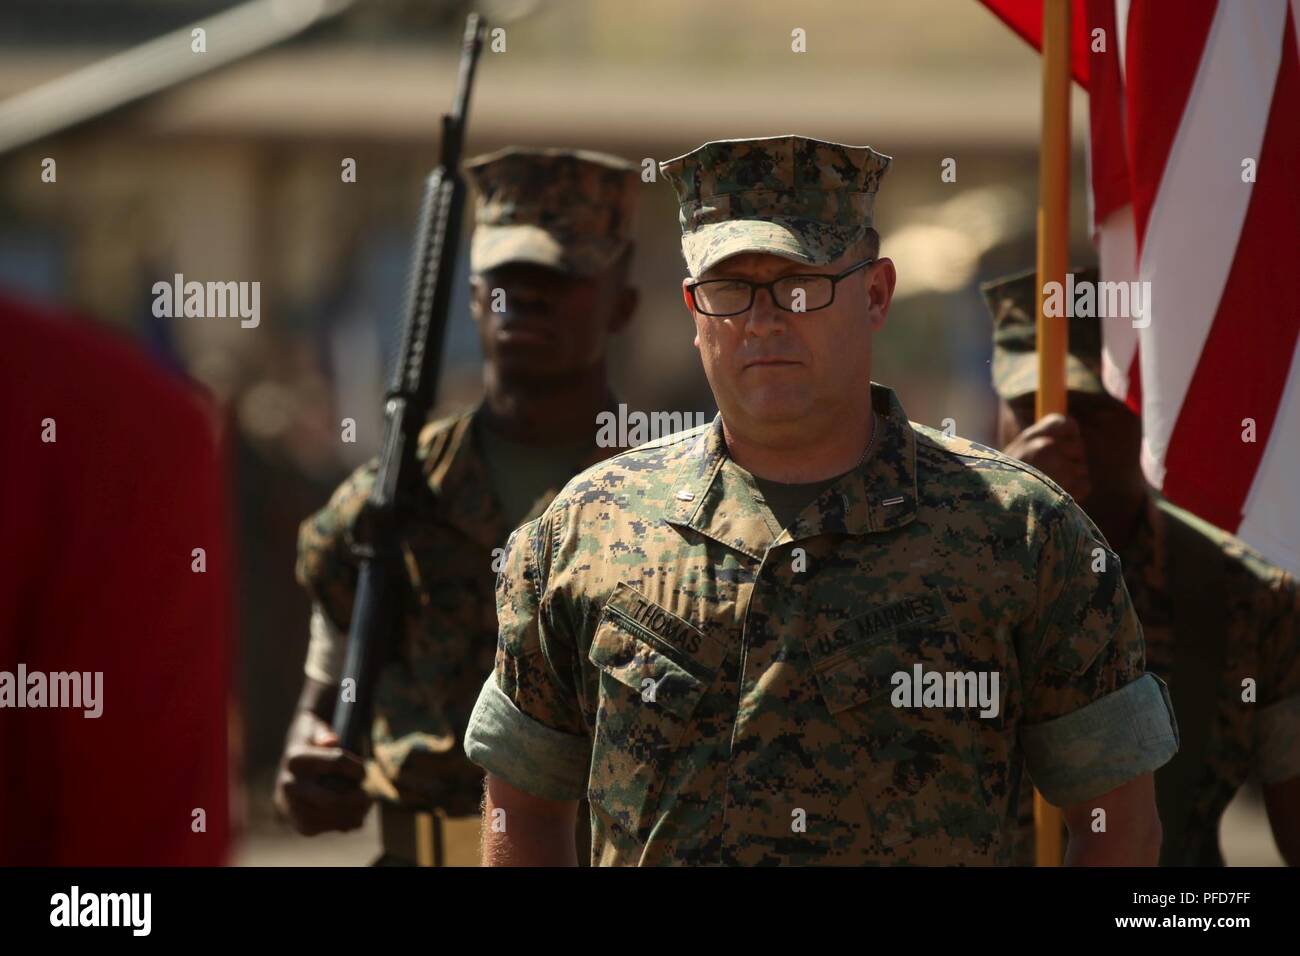 U.S. Marine Corps Chief Warrant Officer 5 David C. Thomas with Fire and Maneuver Intergration Division, Headquarters Marine Corps, stands at attention during a retirement ceremony at Marine Corps Base Camp Pendleton, Calif., June 7, 2018. The ceremony was held in honor of Thomas for his 30 years of meritorious service. Stock Photo